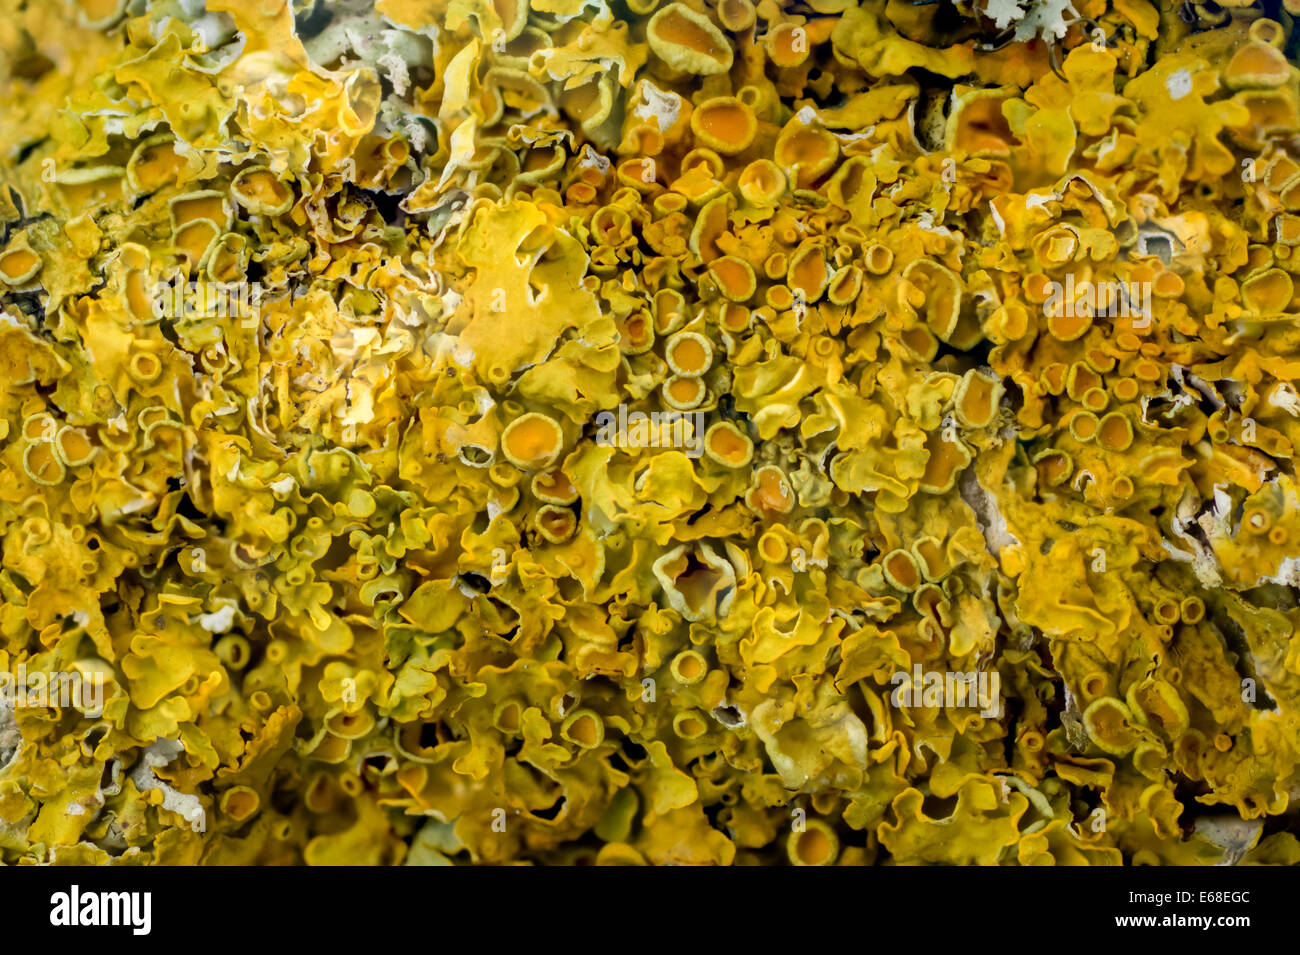 Common Orange Lichen Xanthoria parietina, a full frame focus stacked composite image of a sheet of lichen covering a branch. Stock Photo